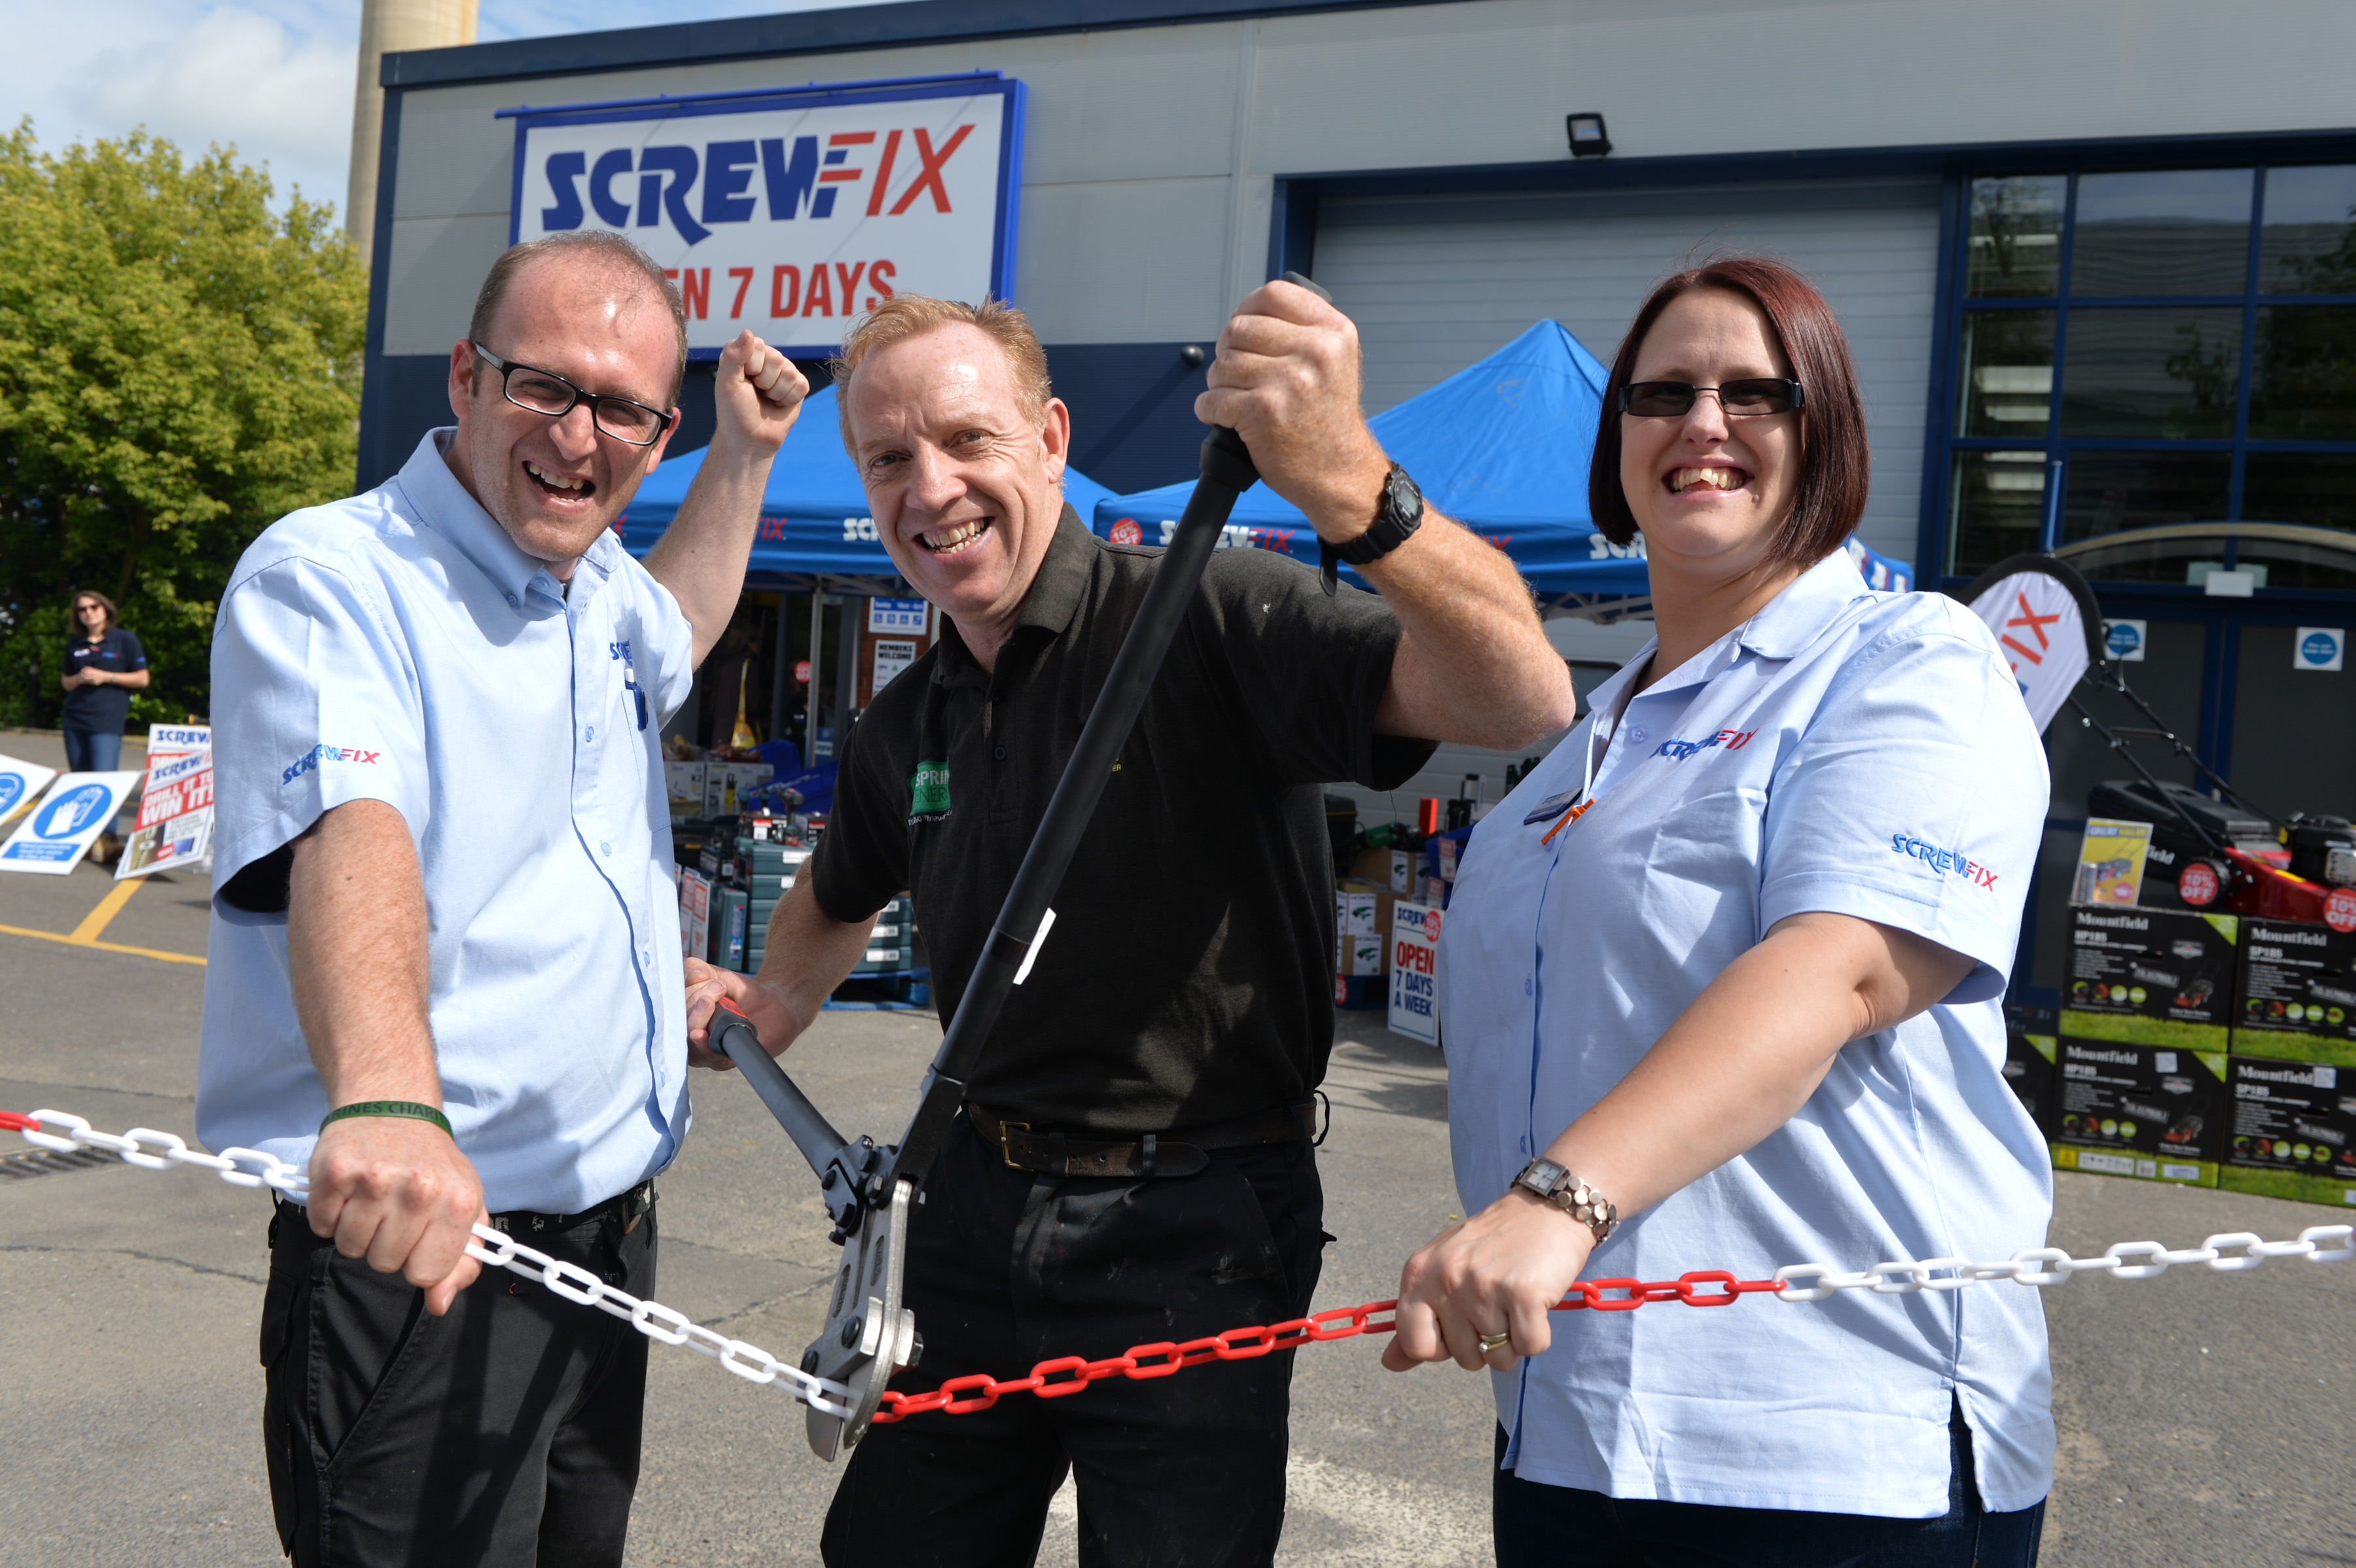 Didcot’s first Screwfix store is declared a runaway success